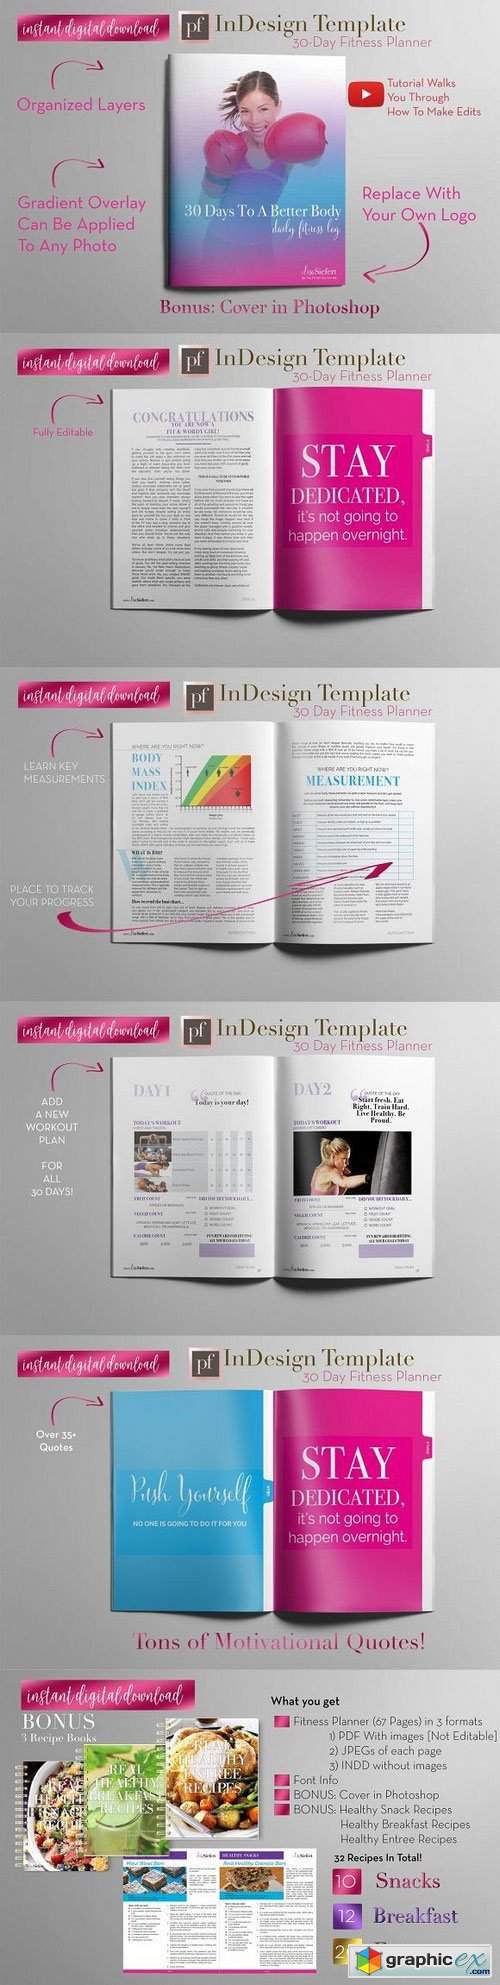  Fitness Planner | InDesign Template  1205805